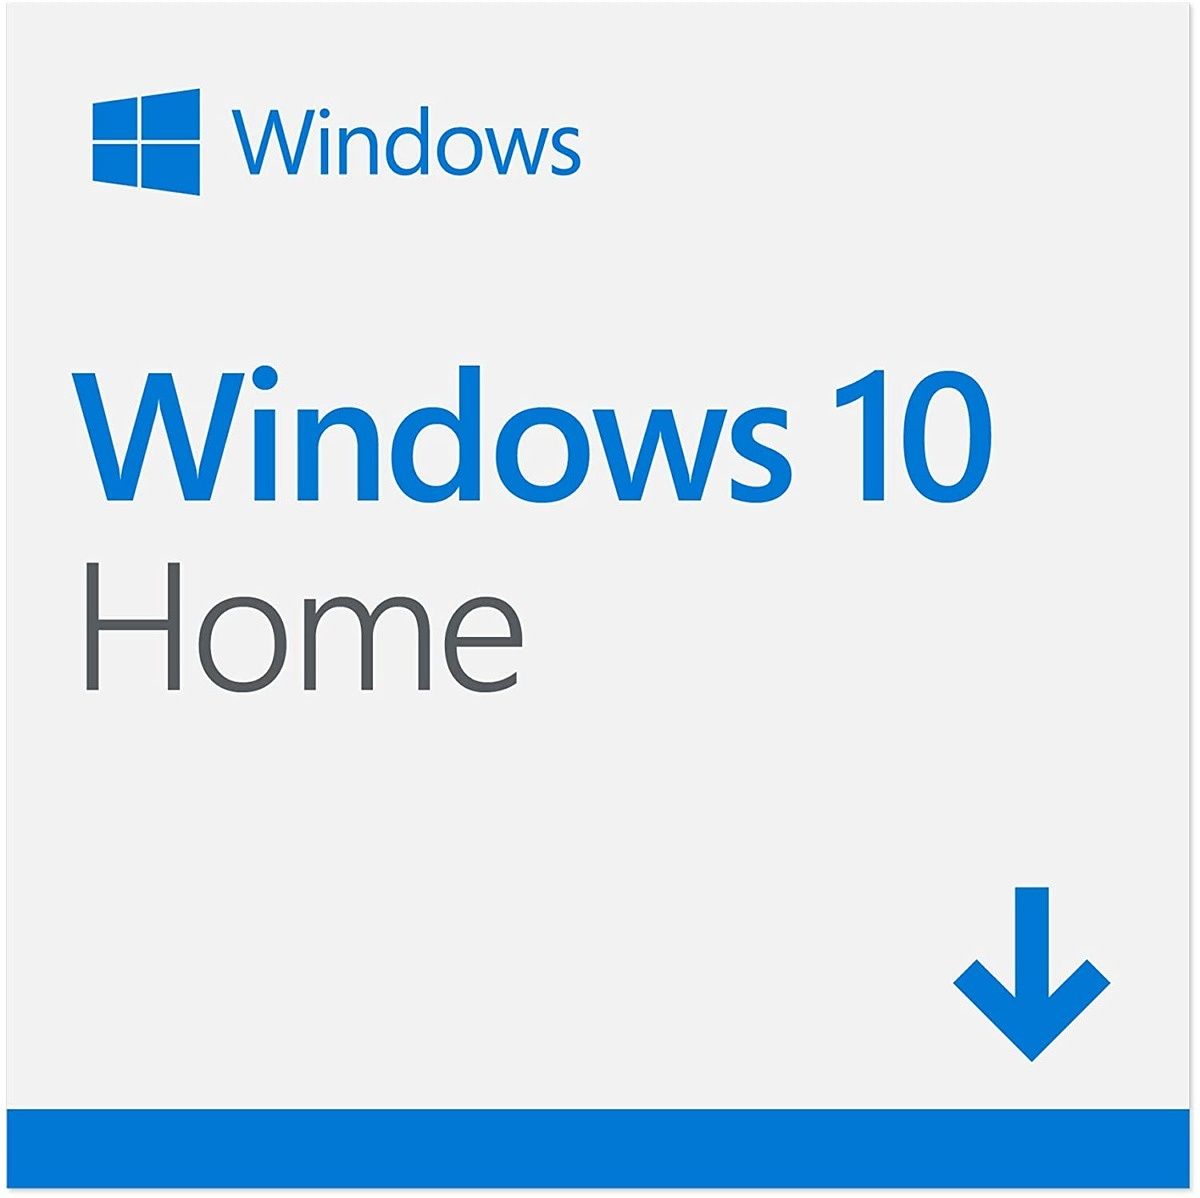 Product key to activate Windows 11.